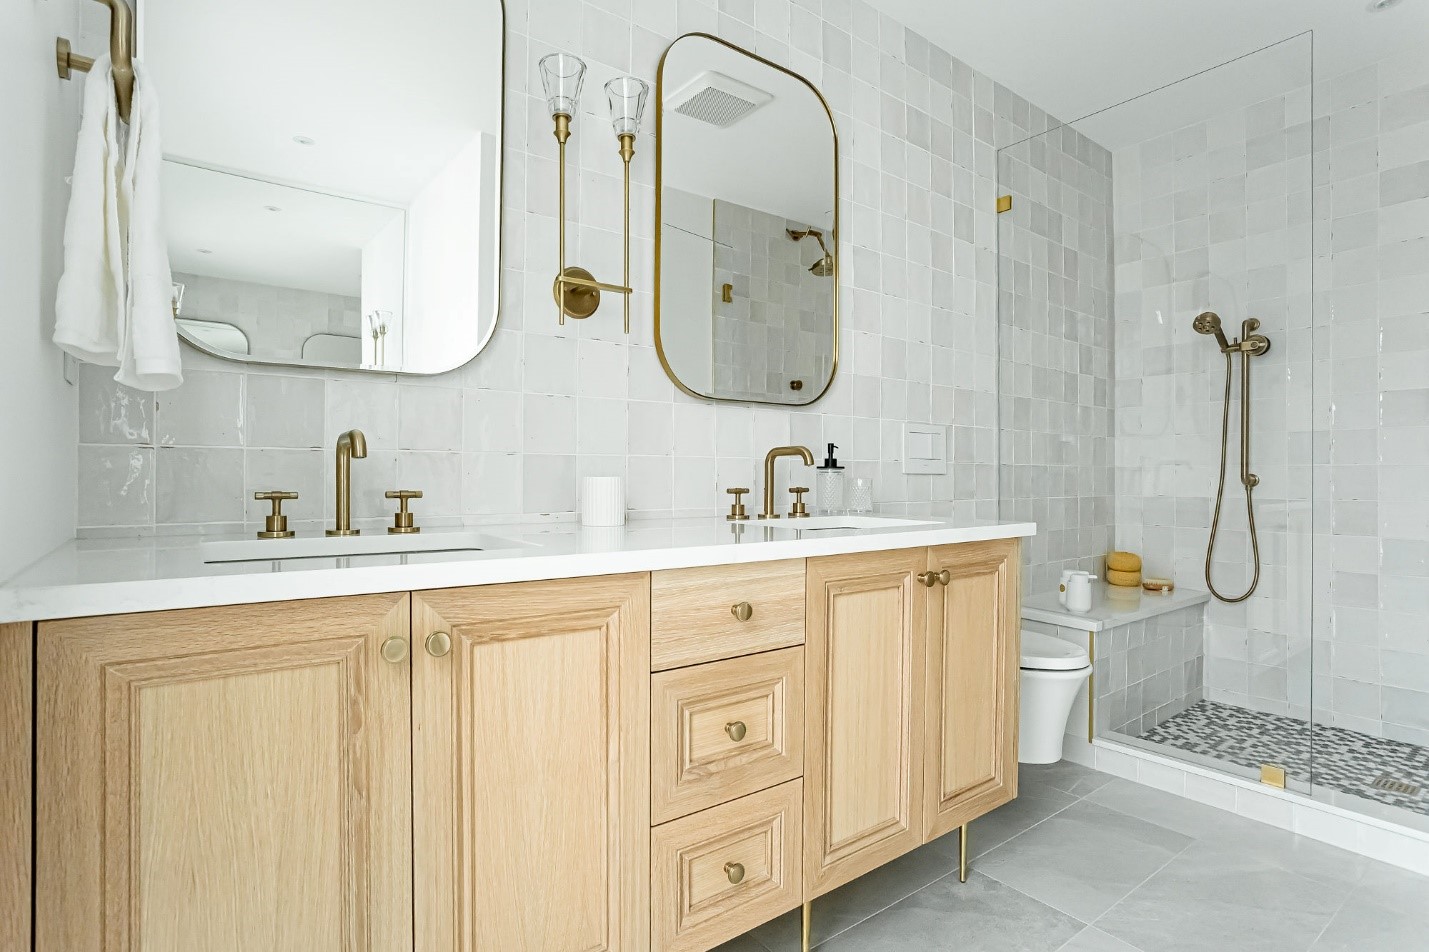 DKC’s bathroom remodeling and renovation